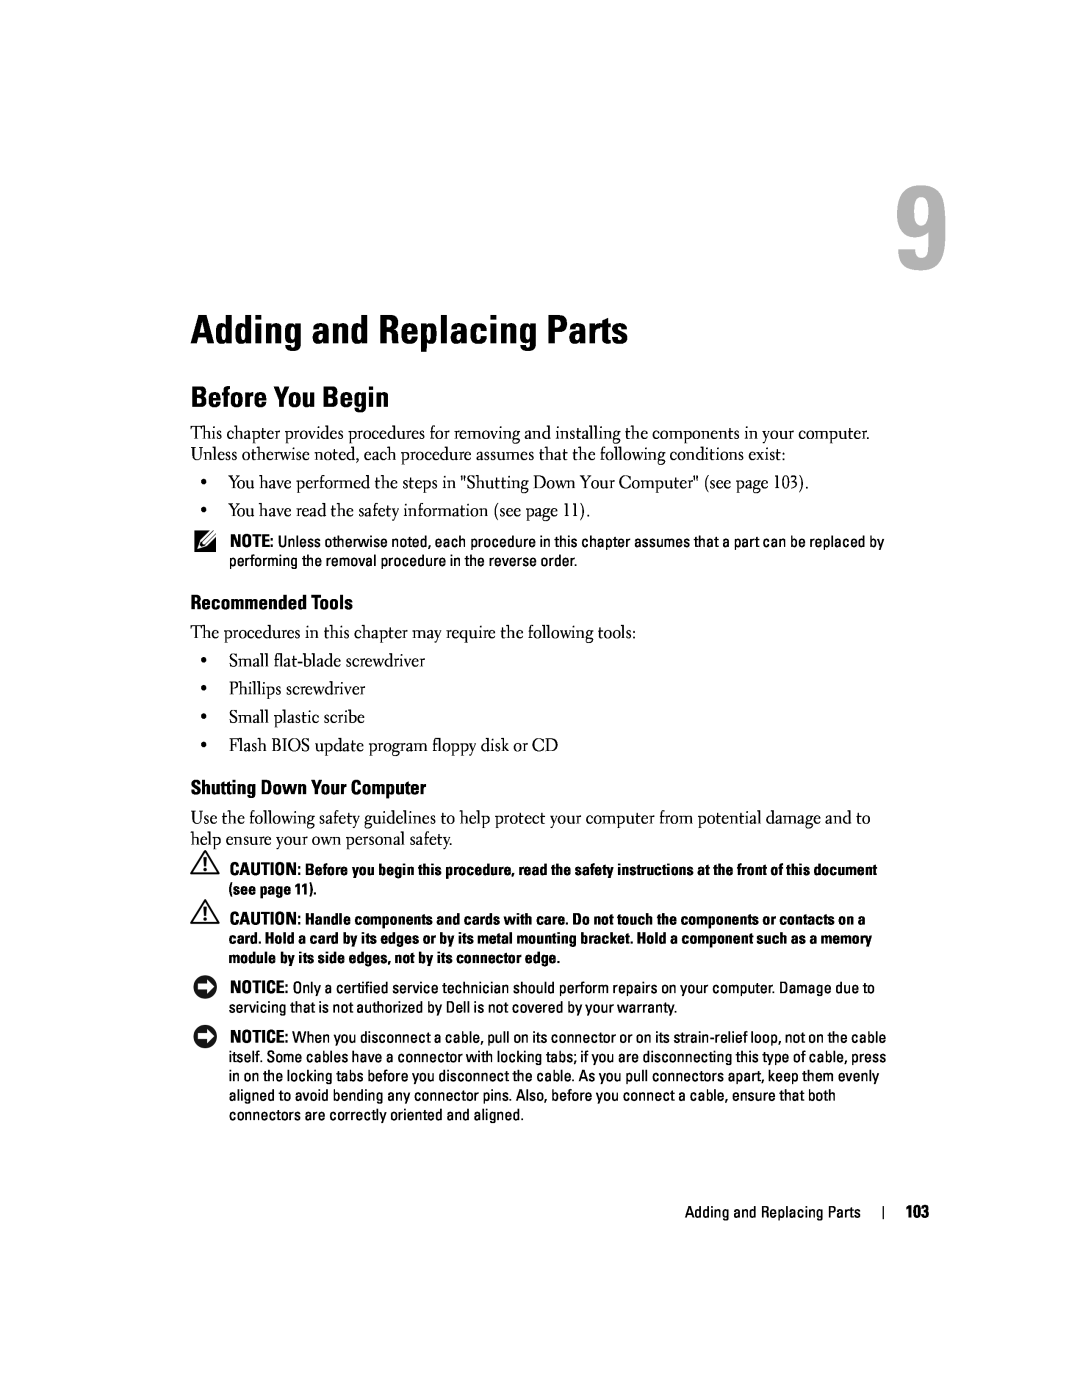 Dell PP09L owner manual Adding and Replacing Parts, Before You Begin, Recommended Tools, Shutting Down Your Computer 